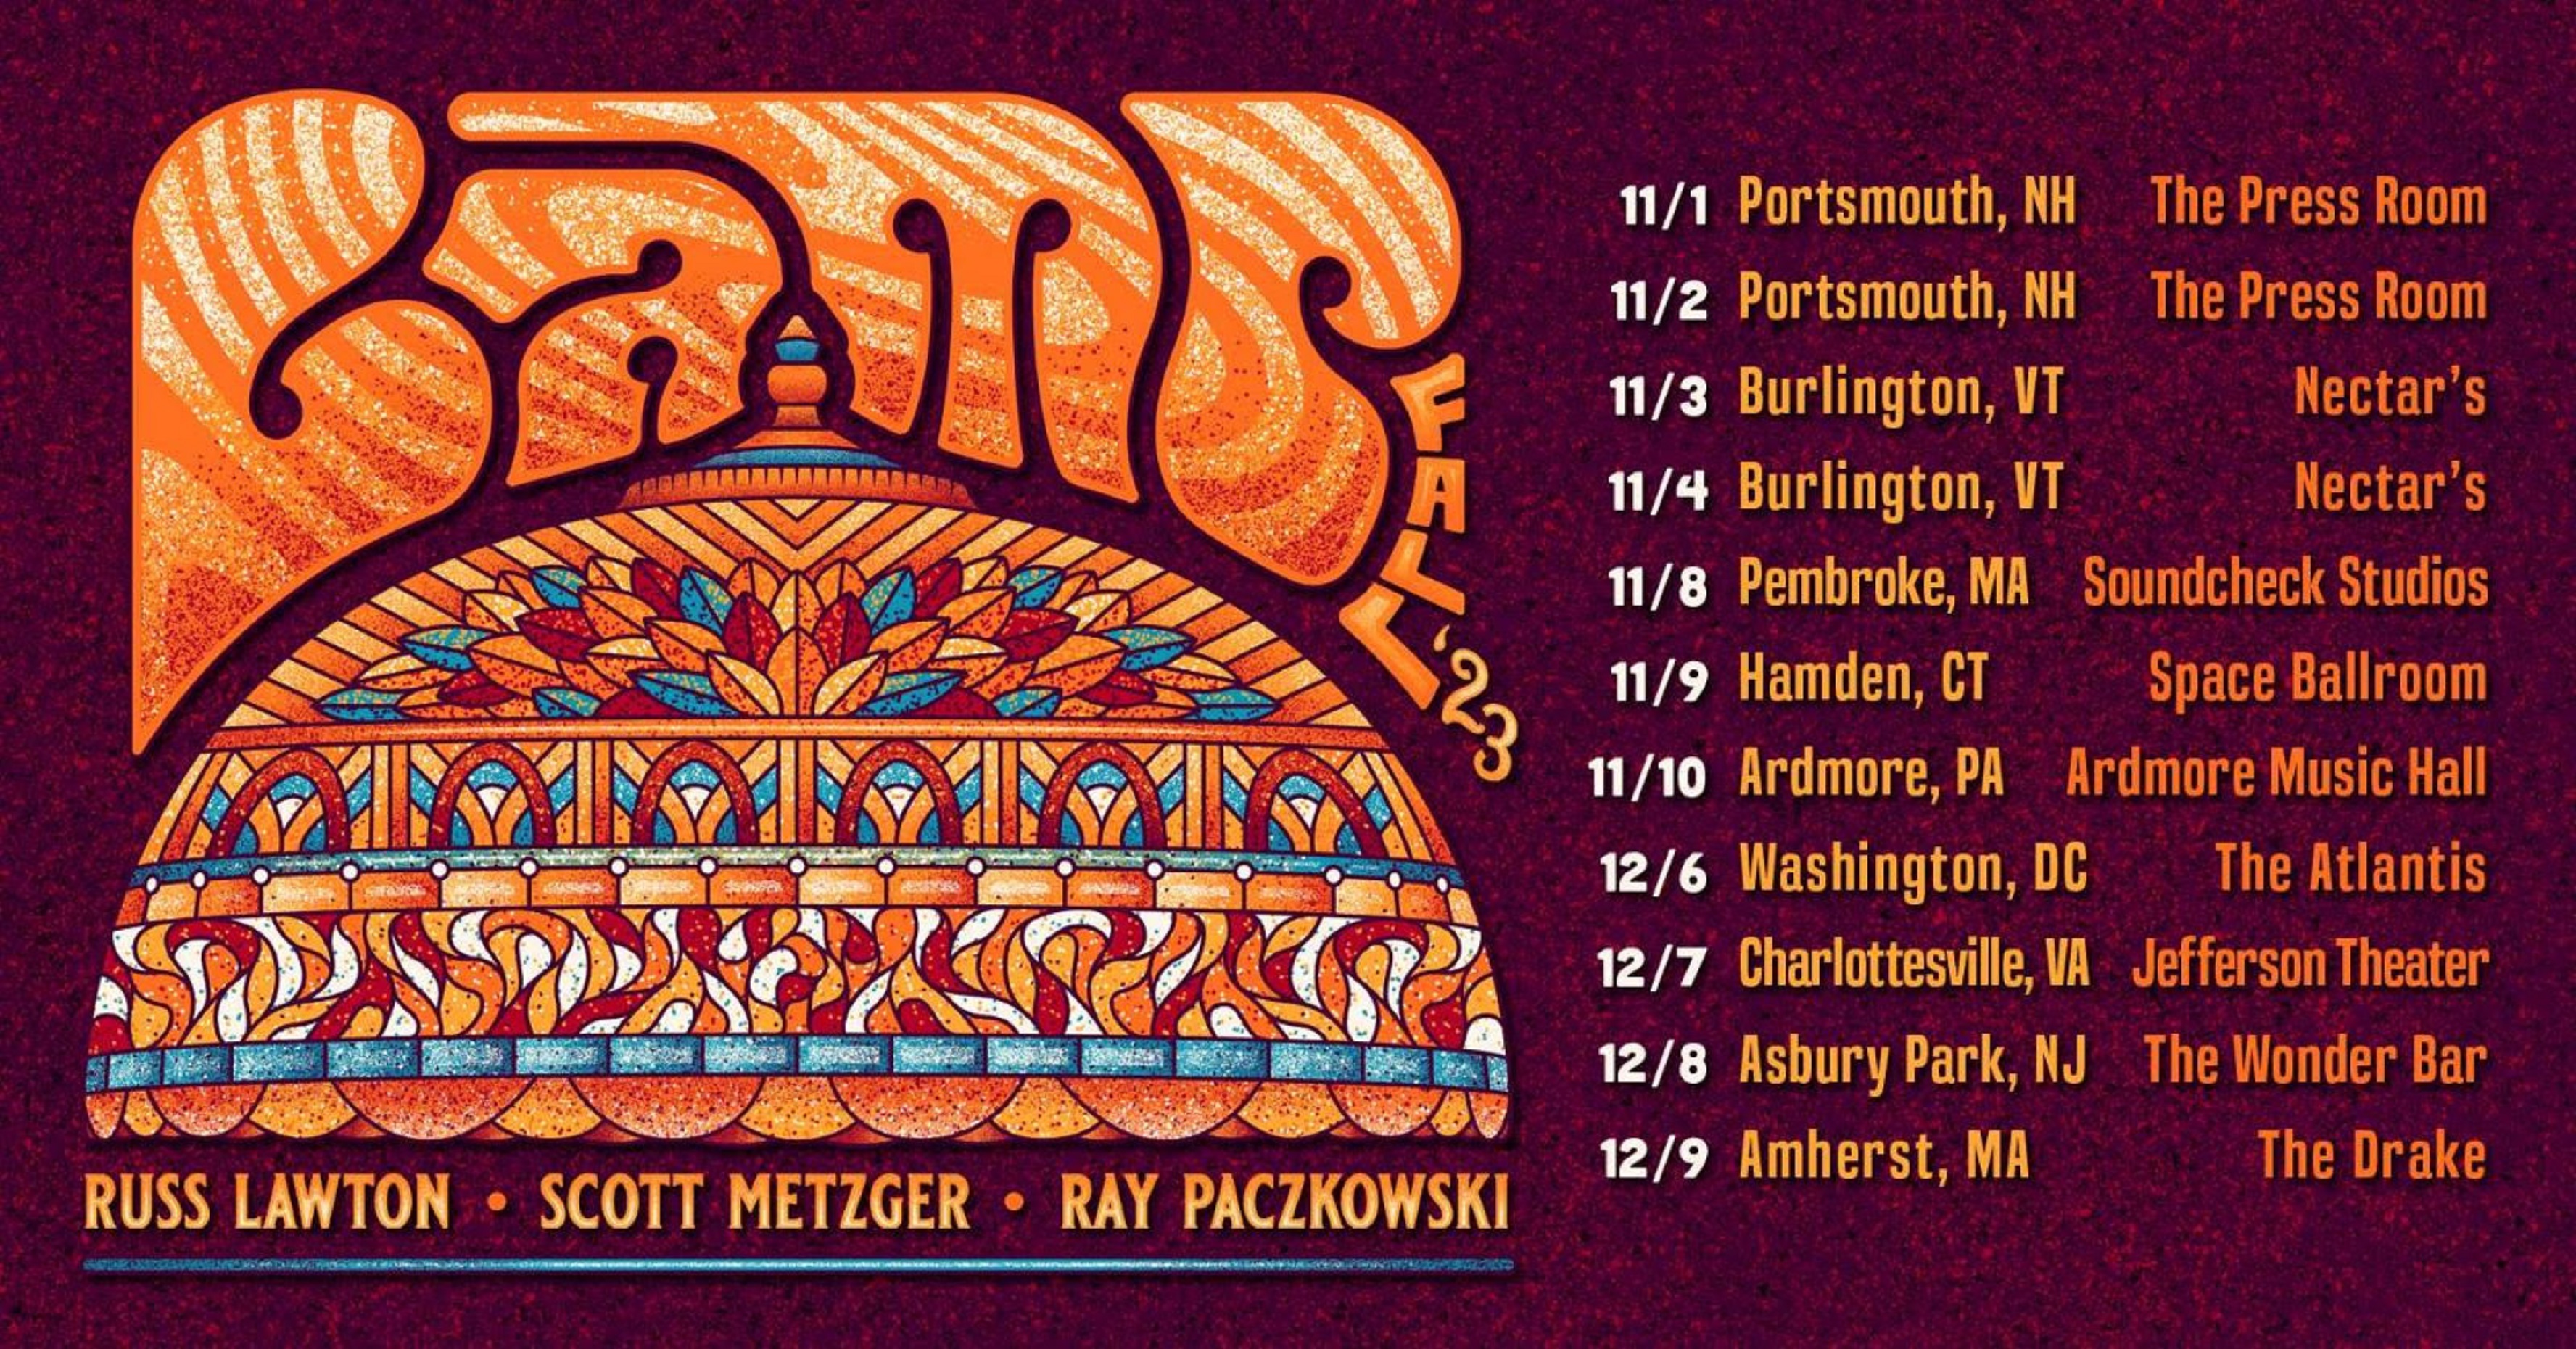 LaMP ft. Russ Lawton, Scott Metzger & Ray Paczkowski Announce 11 Shows This Fall